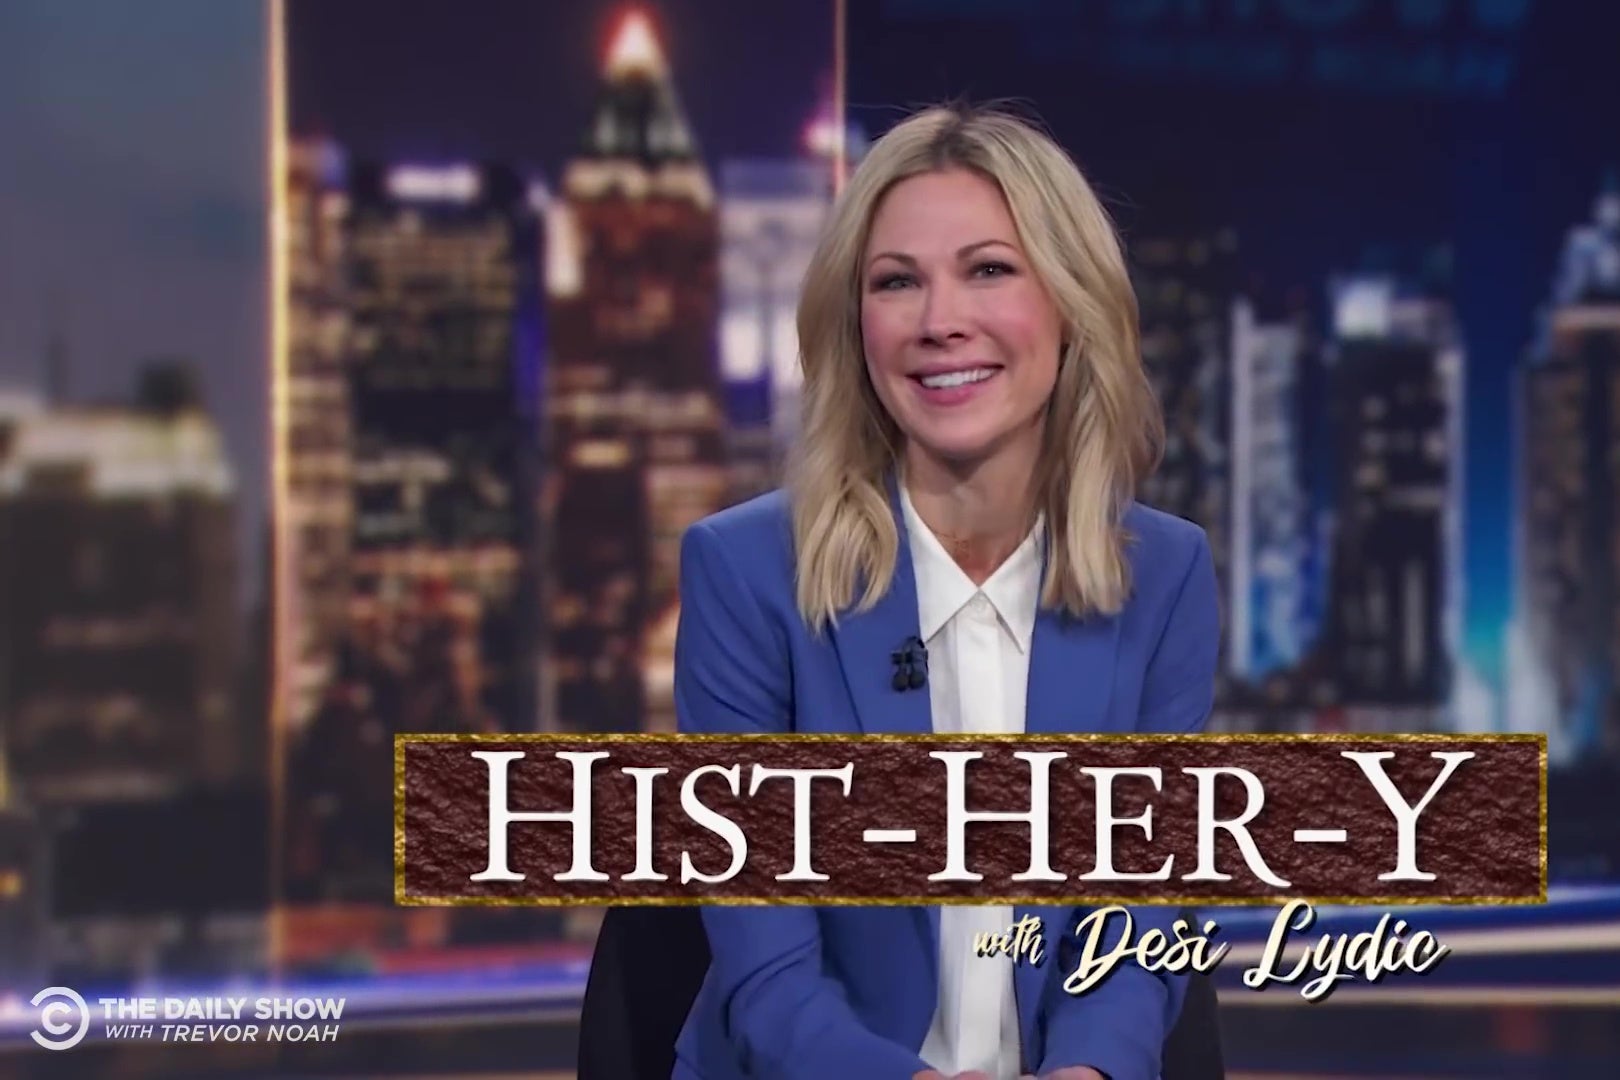 Desi Lydic sits at the anchor desk; the words "Hist-HER-y with Desi Lydic" are superimposed on the image.